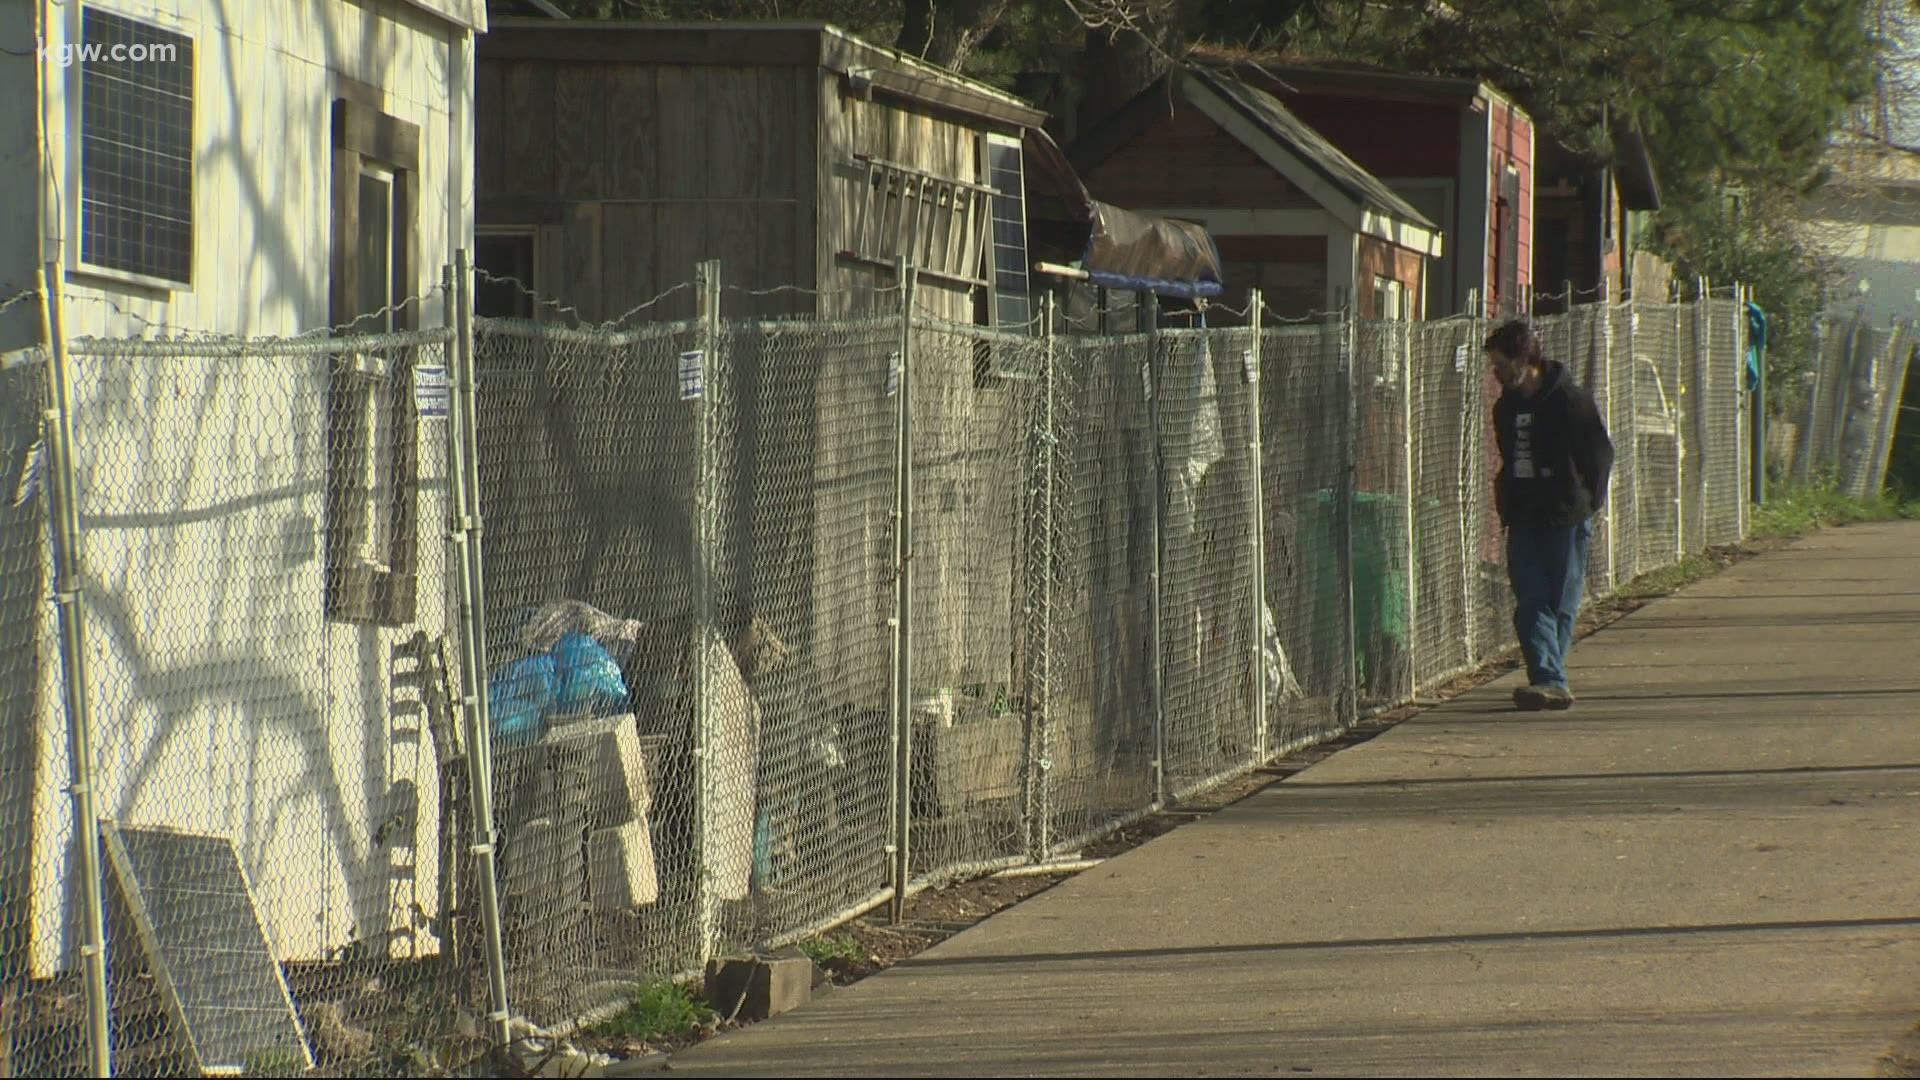 The city of Portland says the homeless village of Hazelnut Grove must clear out. Maggie Vespa reports.